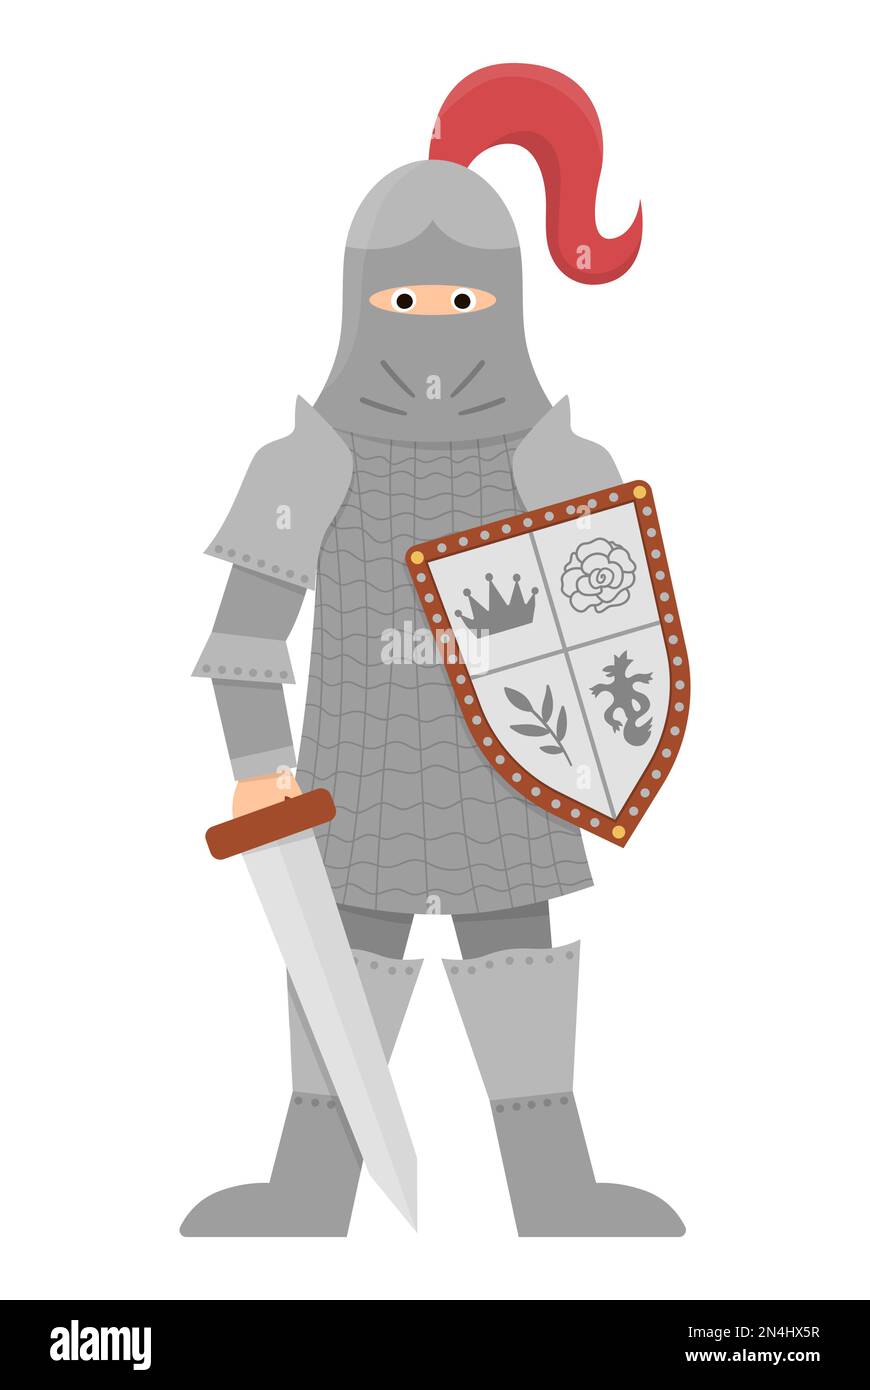 Fairy tale knight. Fantasy armored warrior isolated on white background. Fairytale soldier in helmet with sword, shield, chain mail. Cartoon icon with Stock Vector